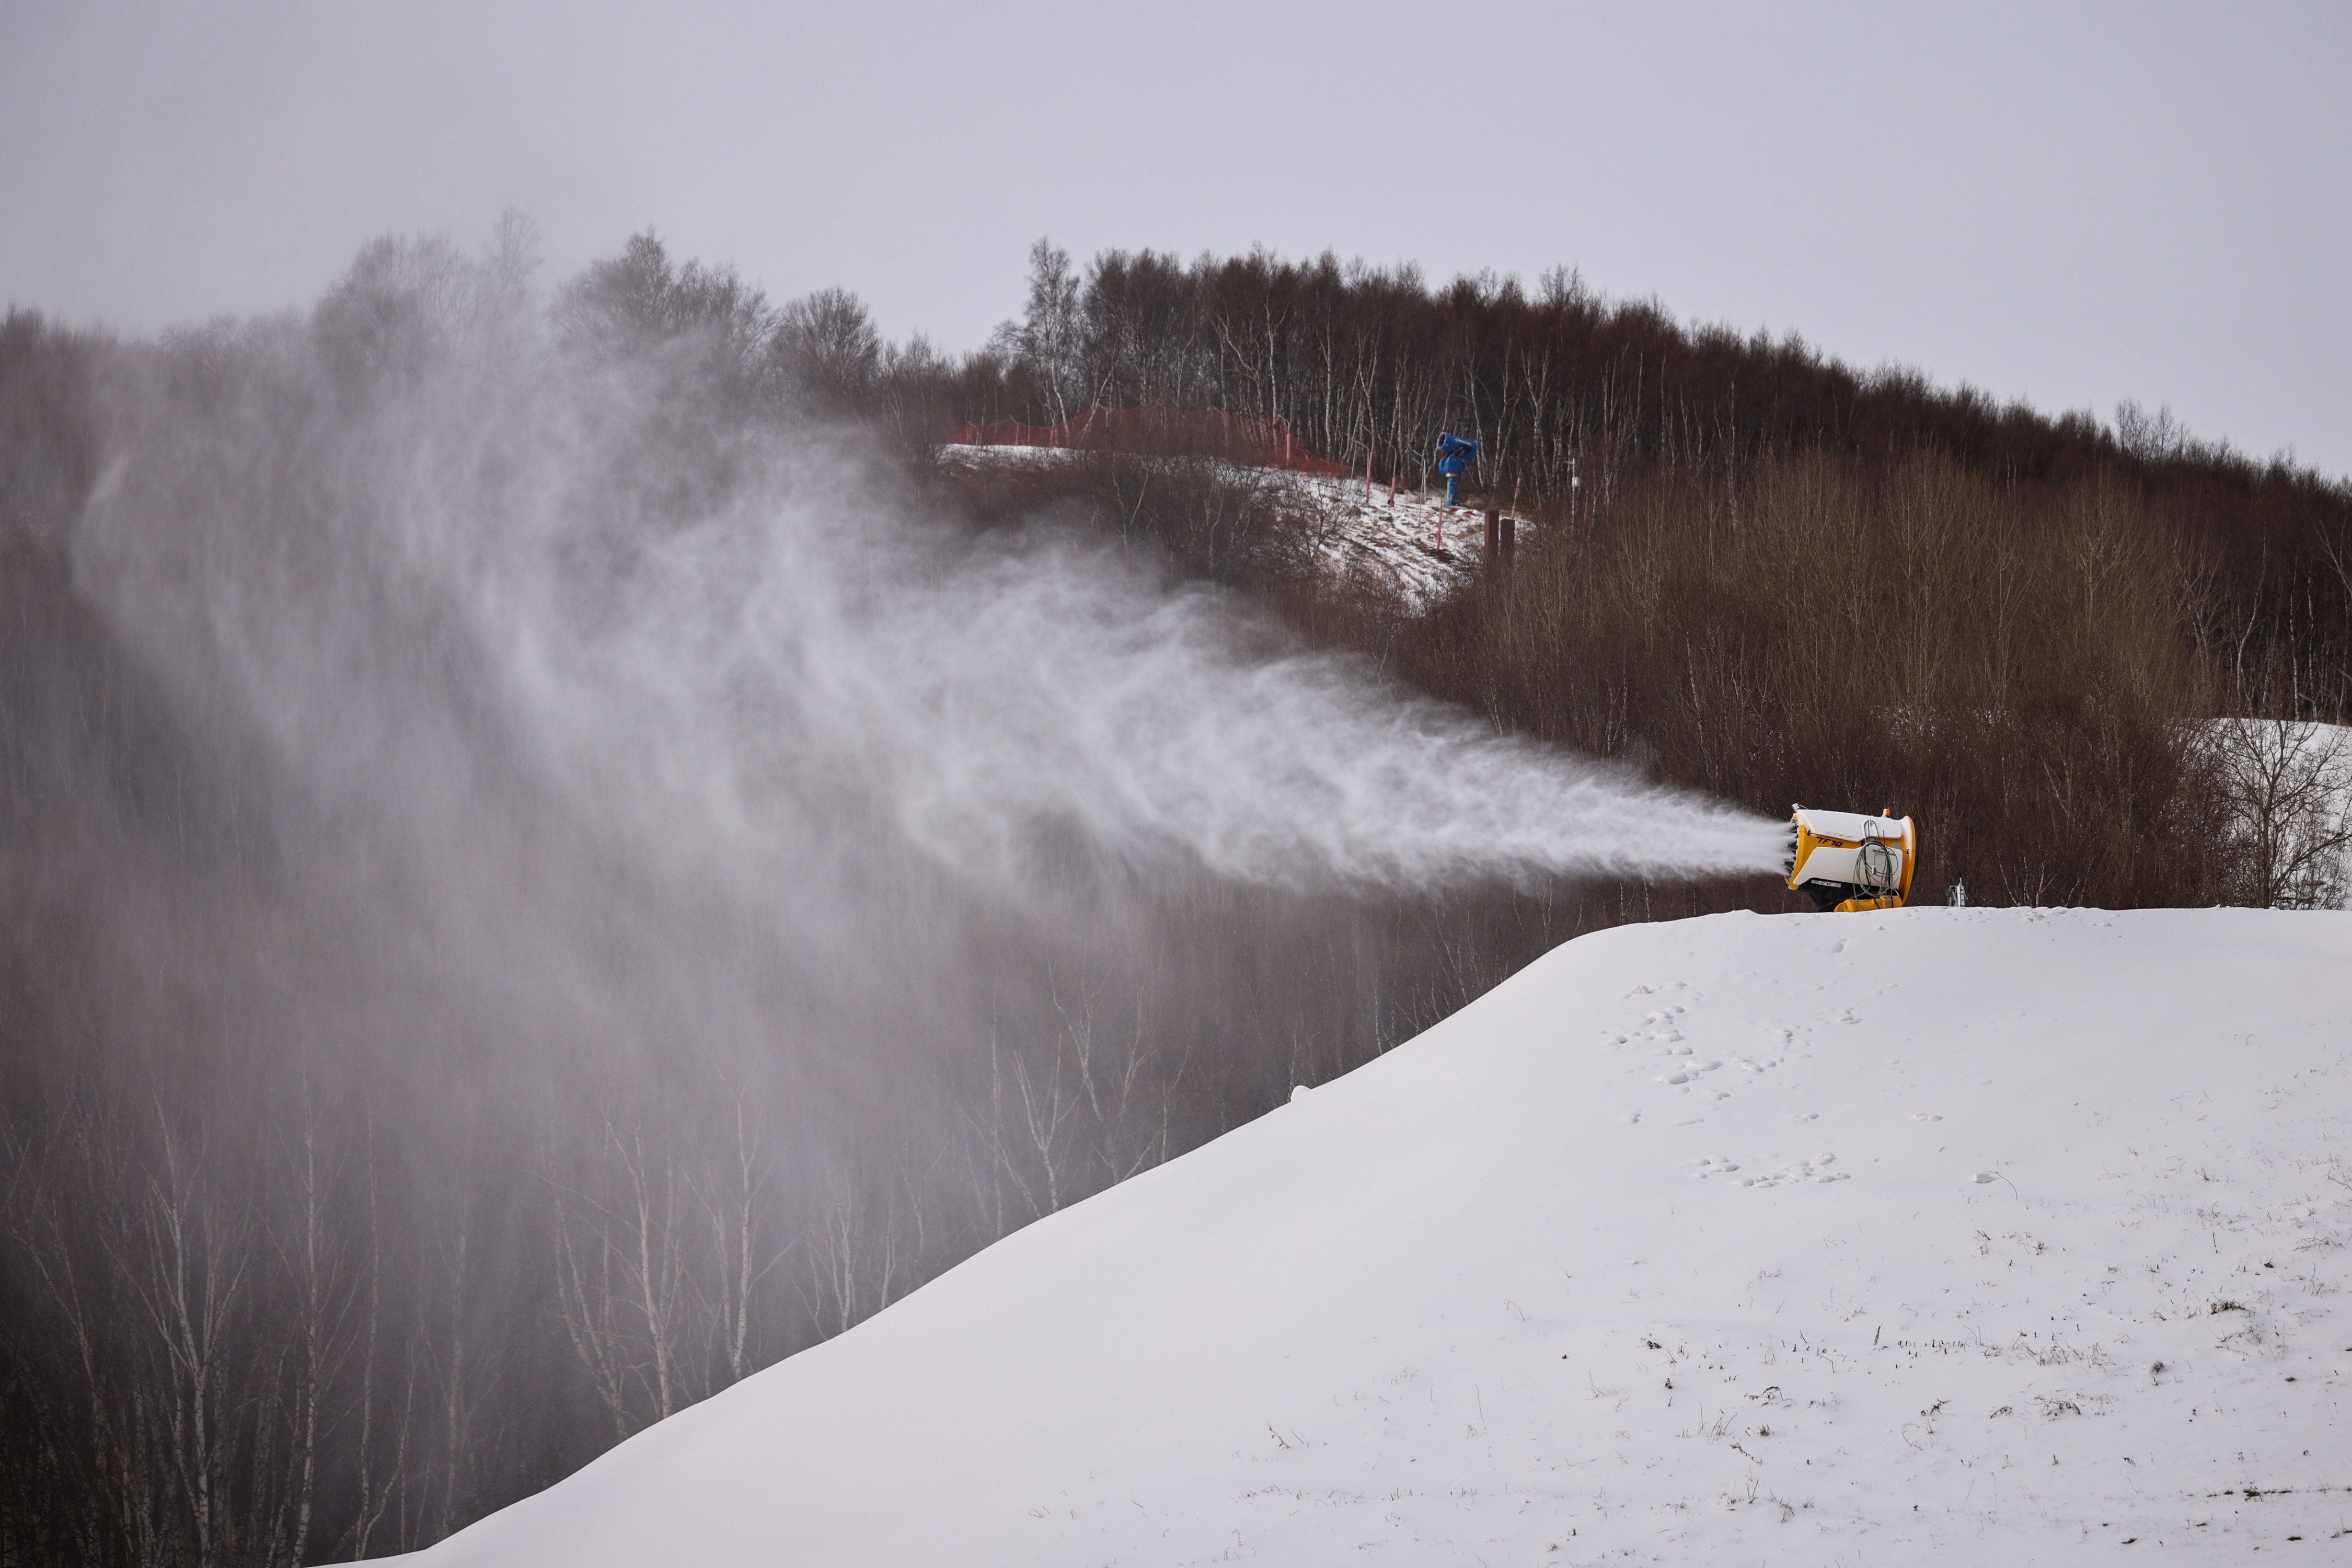 A TechnoAlpin snow gun sprays snow onto a slope for recreational use at the Genting ski resort in Zhangjiakou near venues of the Beijing 2022 Winter Olympics, Hebei province, China, November 20, 2021. REUTERS/Thomas Peter/File Photo